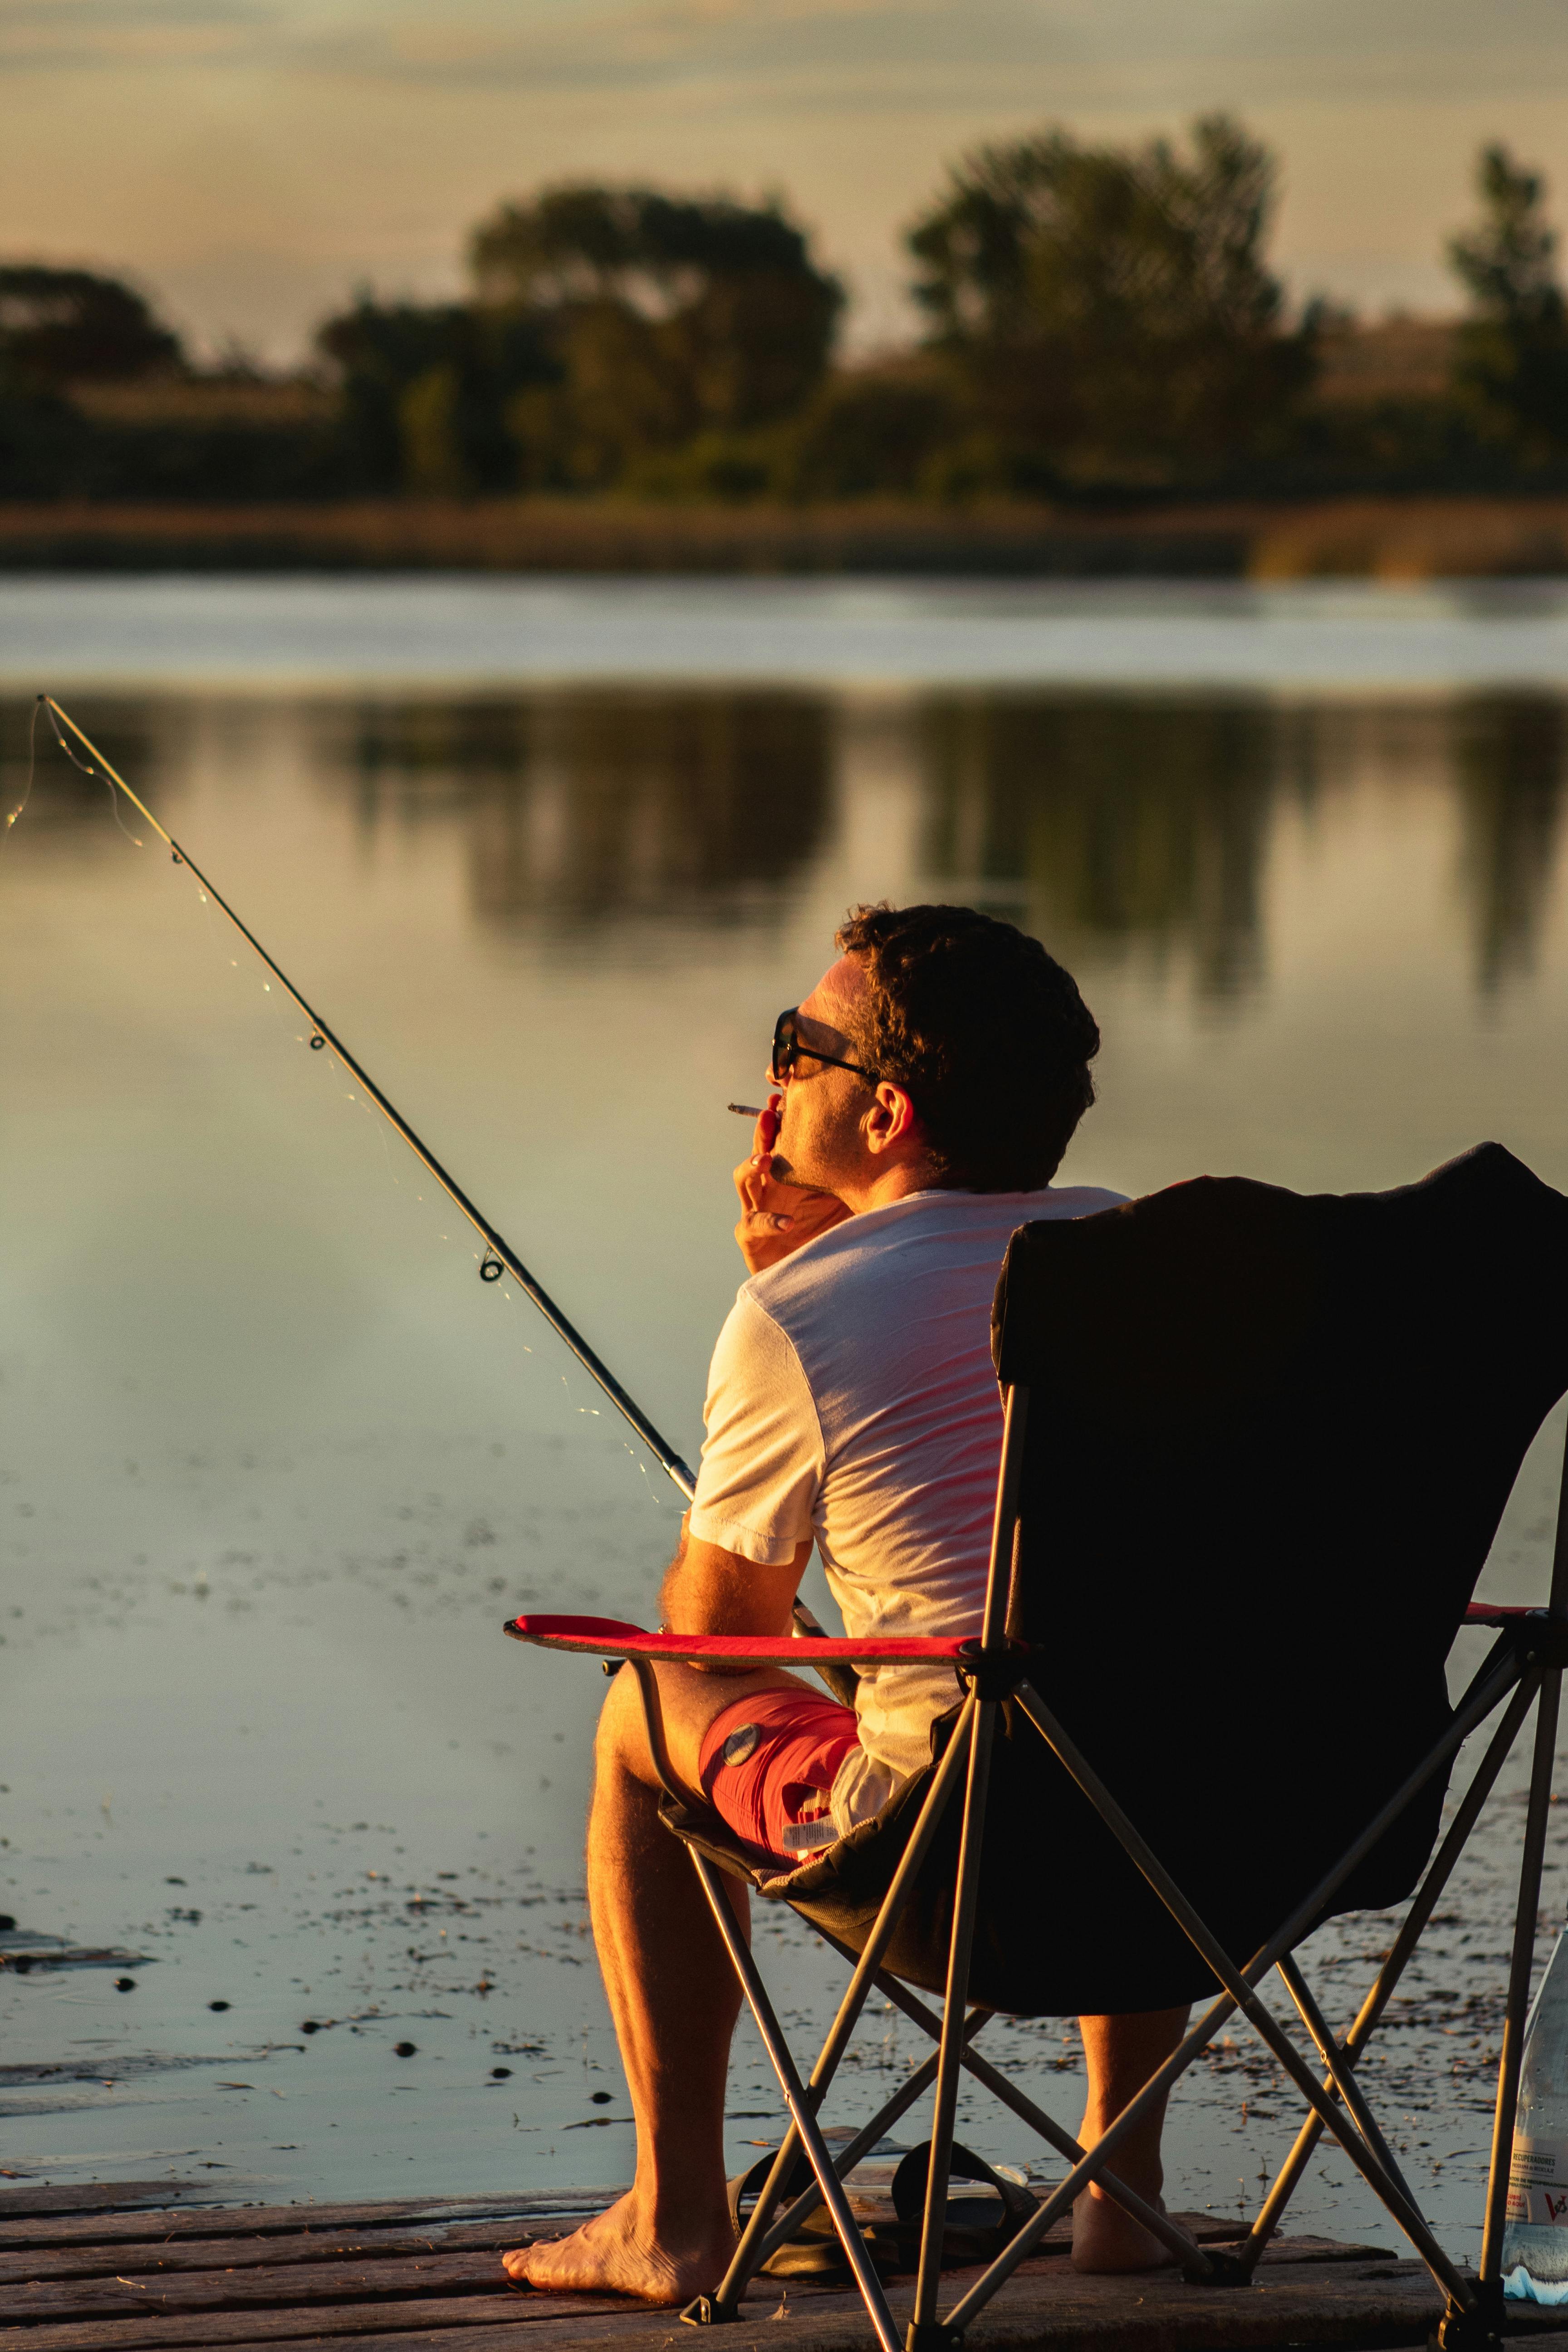 Man Holding Fishing Rod While Sitting on Camping Chair · Free